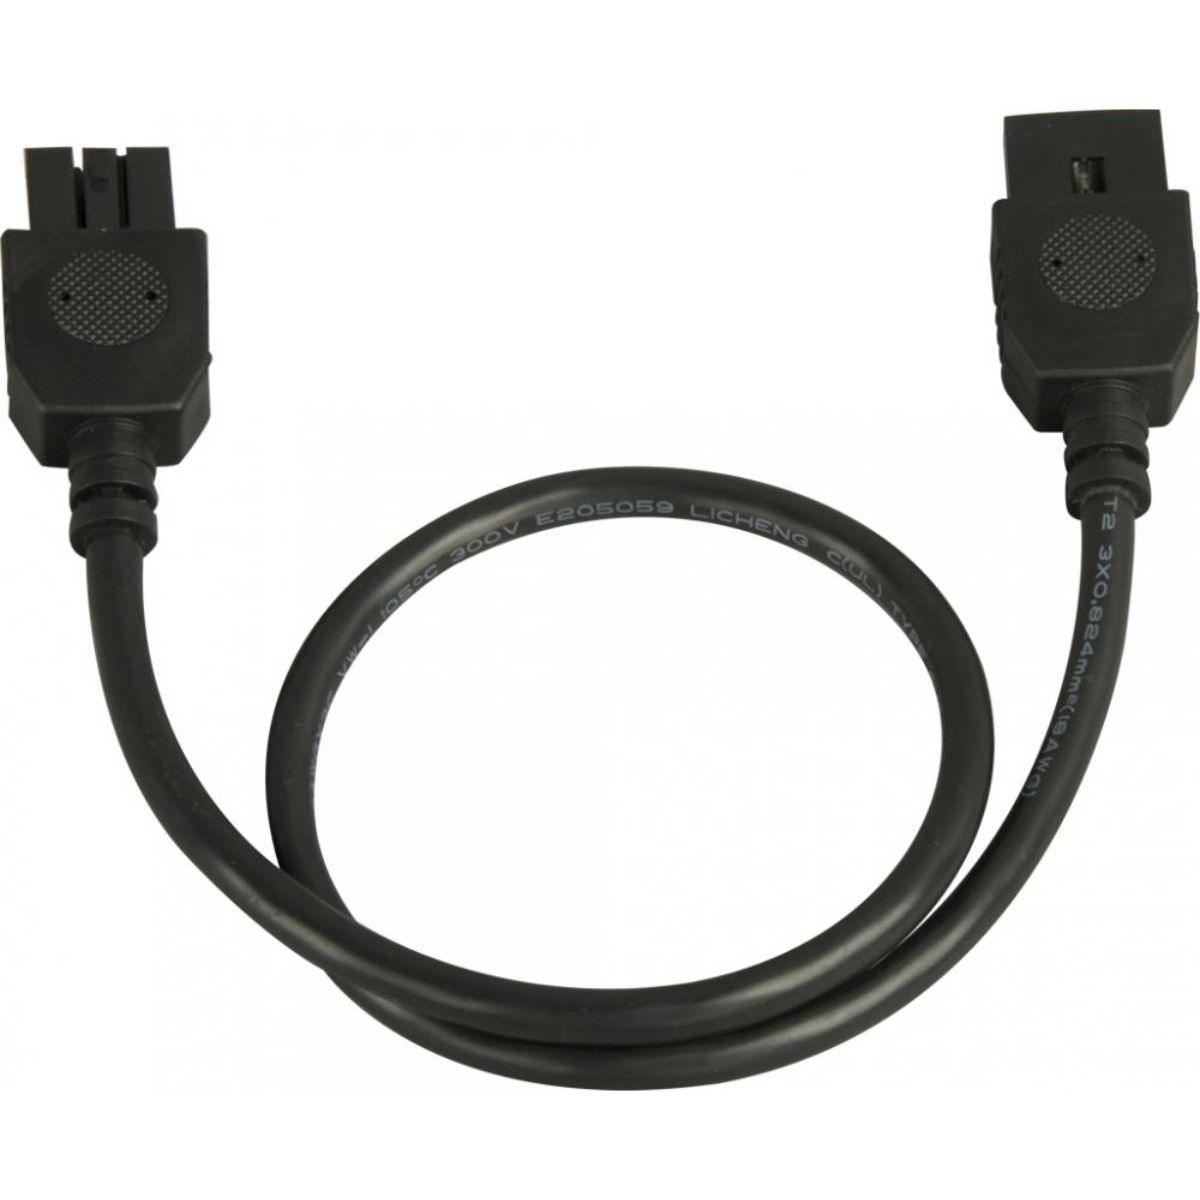 CounterMax 12in. Connecting Cord, Black - Bees Lighting